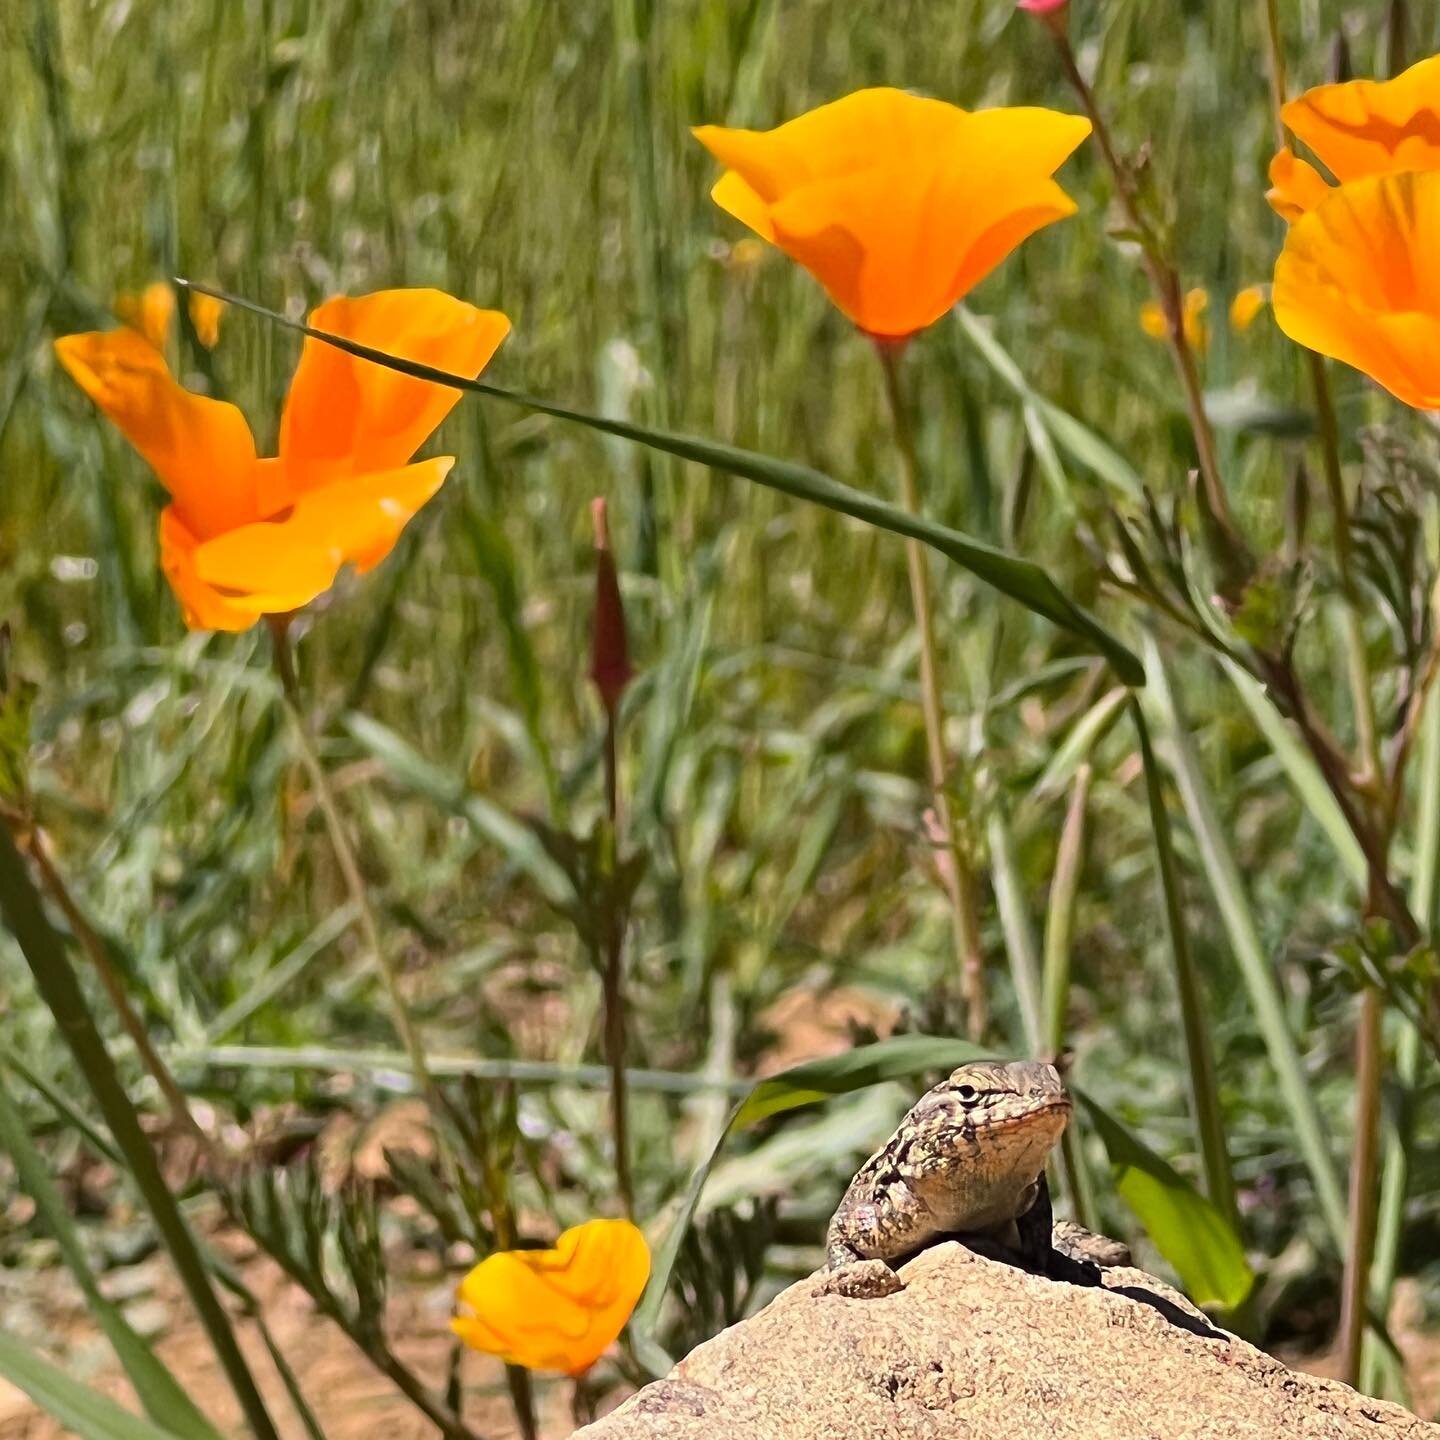 Does anyone else feel like they&rsquo;re just gently and luxuriously unfurling to the sunny warmer days (much like this little lizard, sunning themselves on a rock)?

Appreciating and soaking in these beautiful days of springtime transition. 

☀️

[I